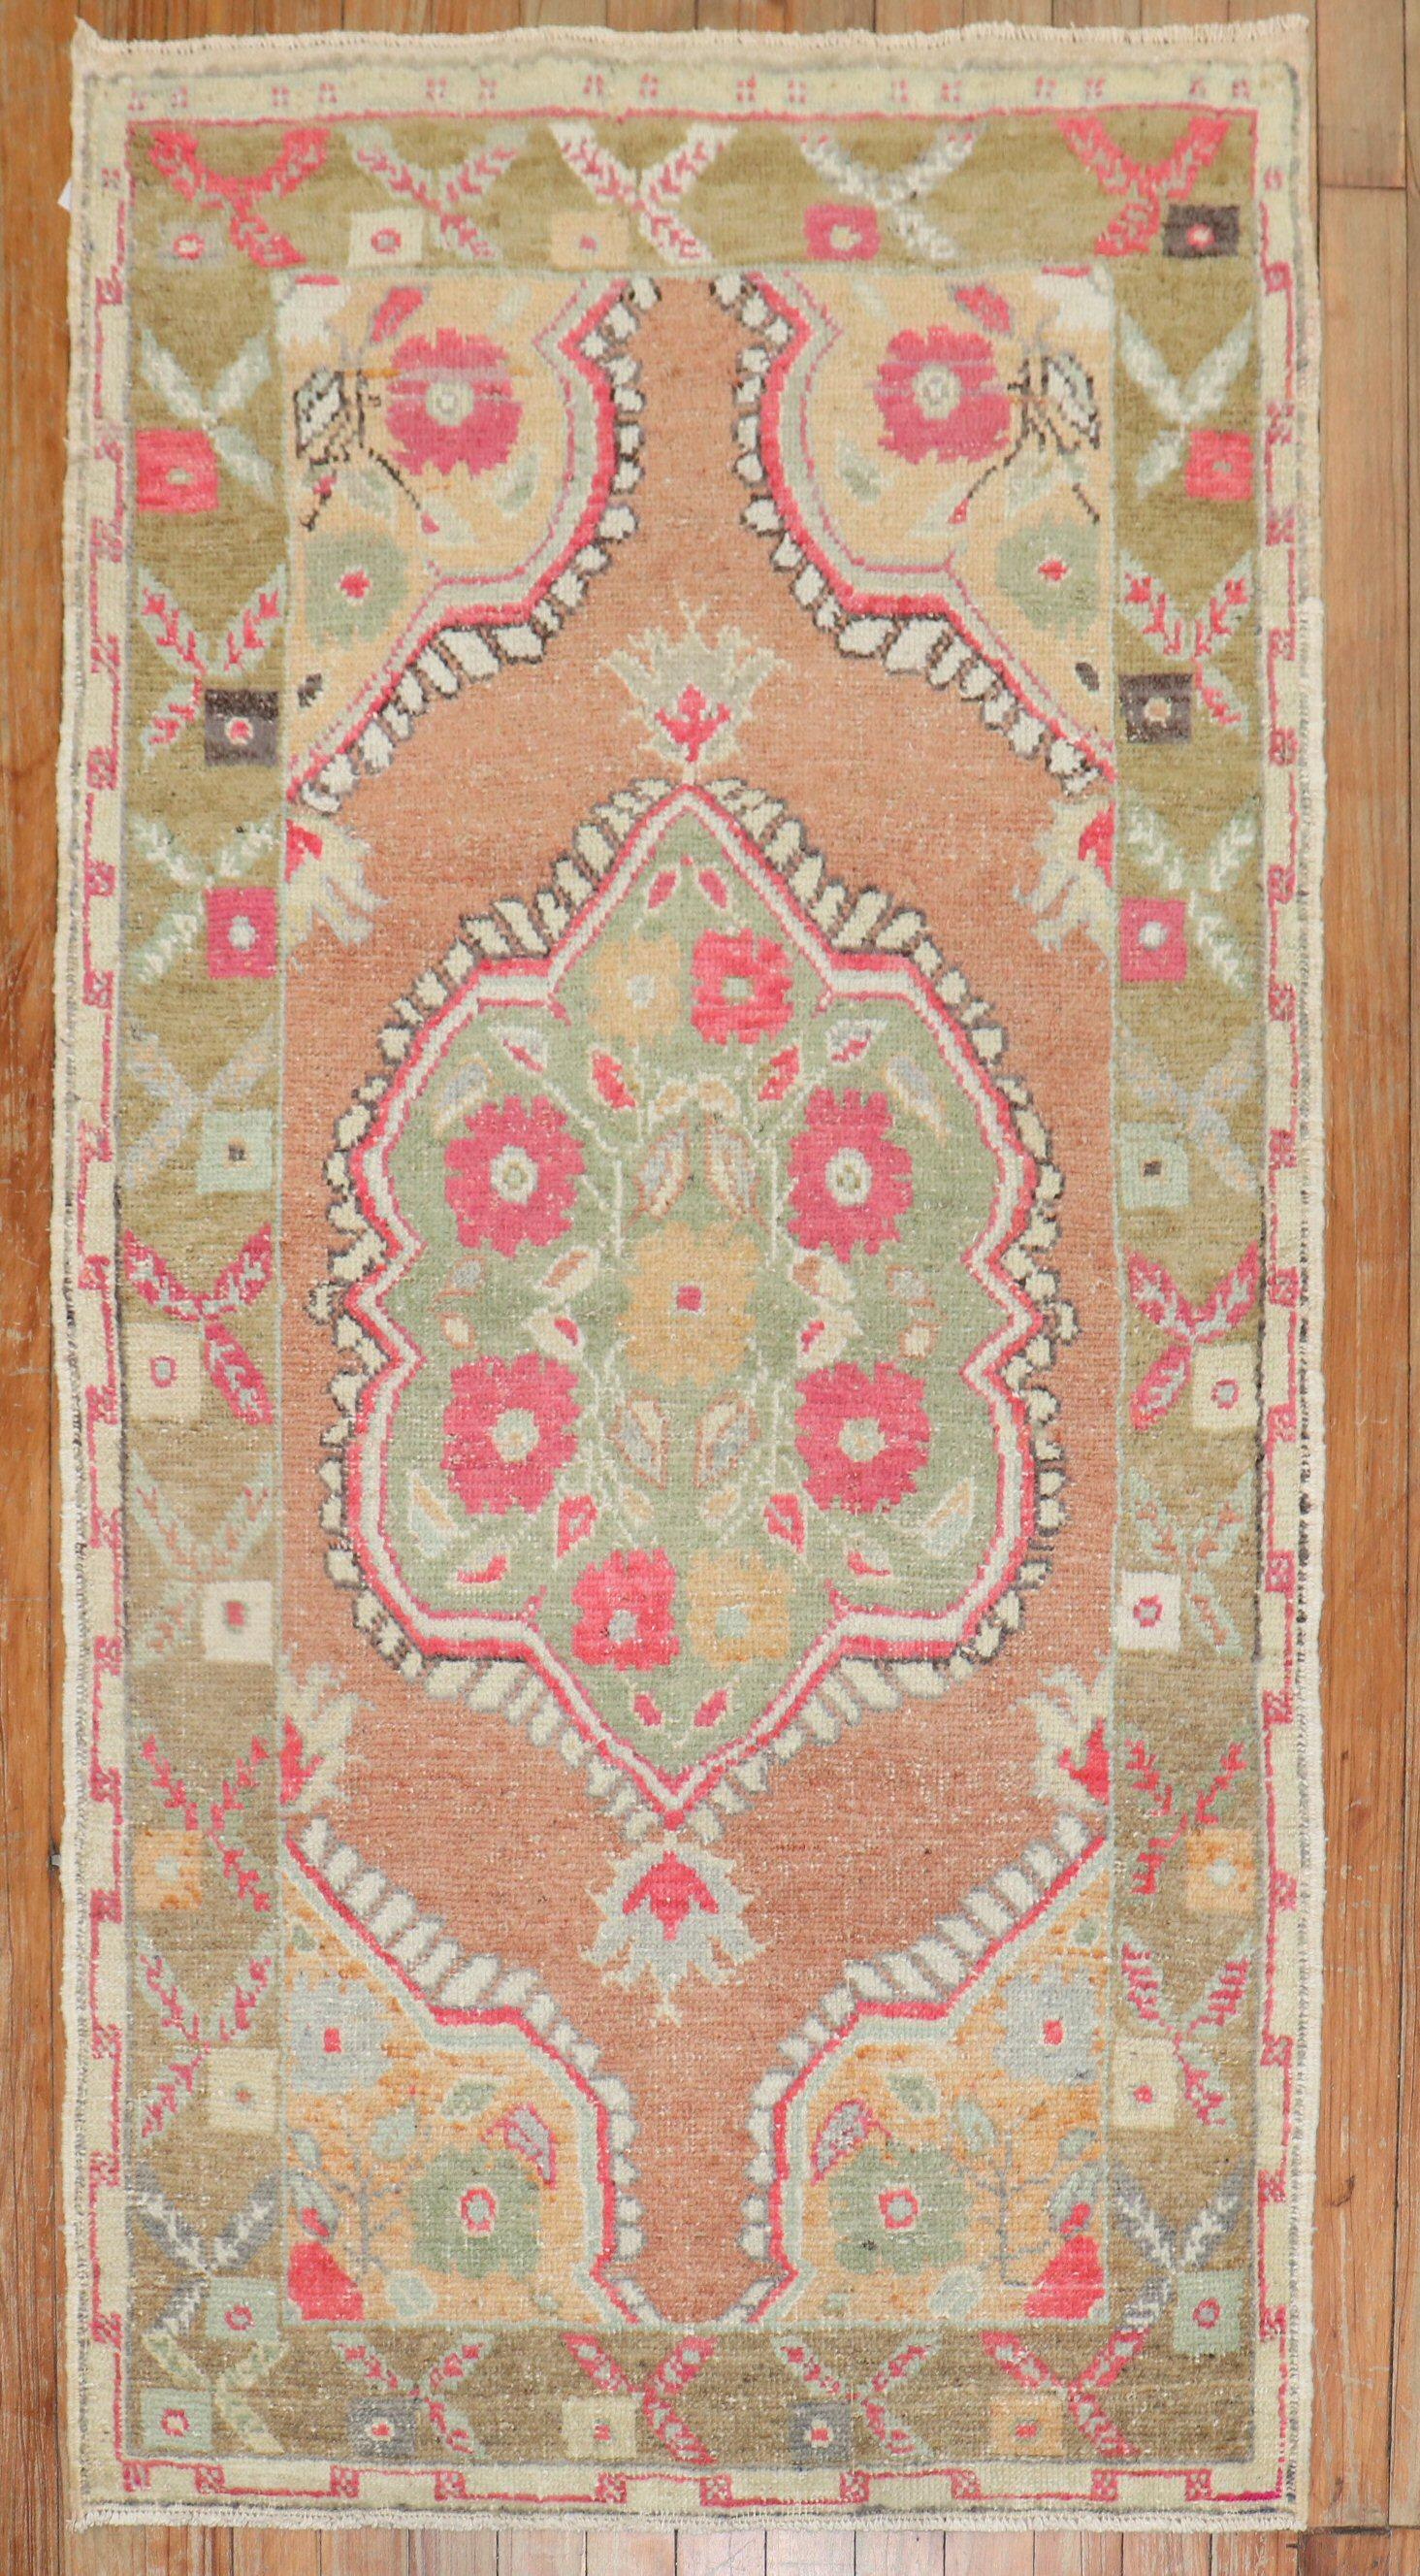 A colorful mid-20th-century Turkish throw-size rug

Measures: 2'8'' x 4'11''.